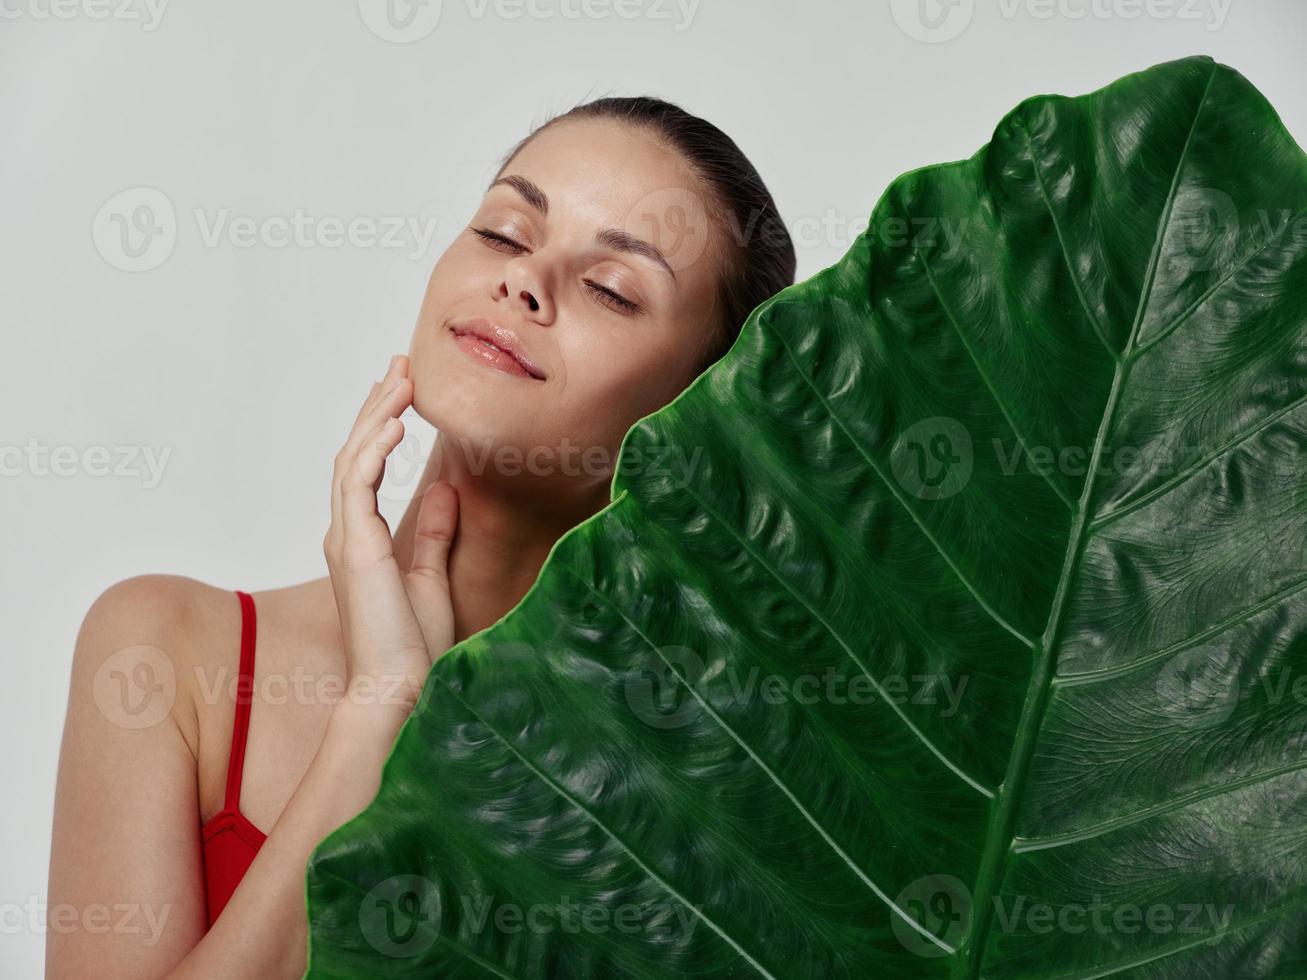 woman with closed eyes touching face with hand and green leaf palm tree clear skin natural look photo